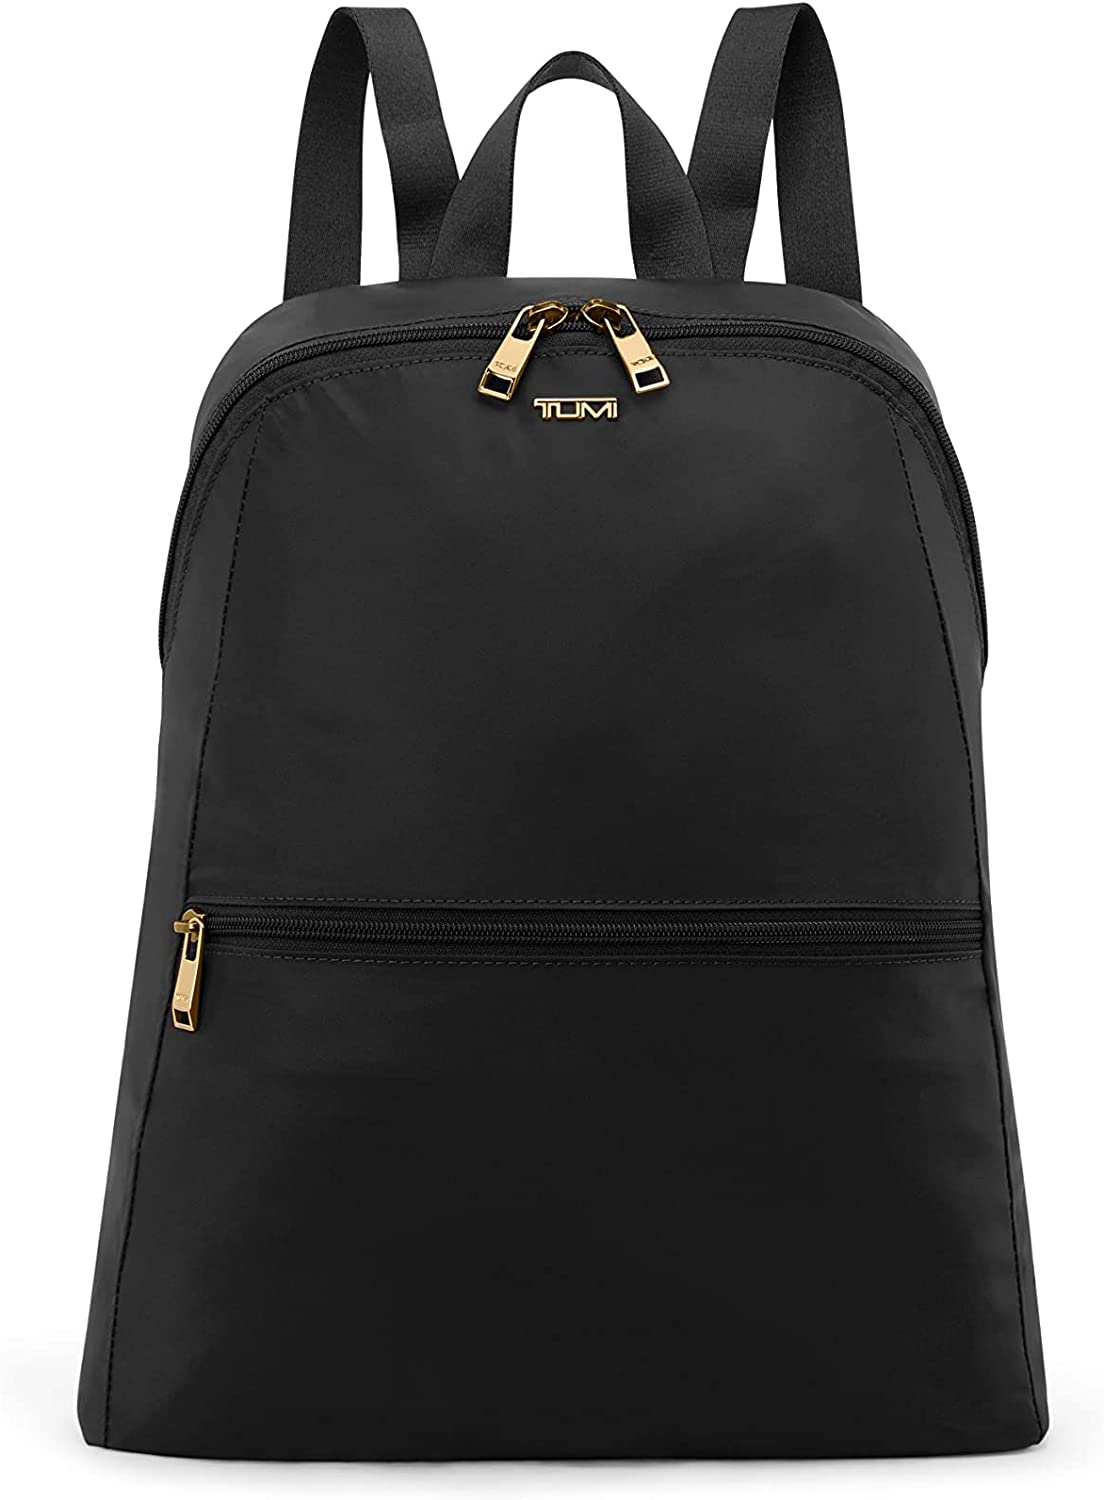 TUMI Just In Case Backpack - Small Travel Bag for Women & Men - Carry Travel Accessories - Traveling Backpack & Work Backpack - Black/Gold
